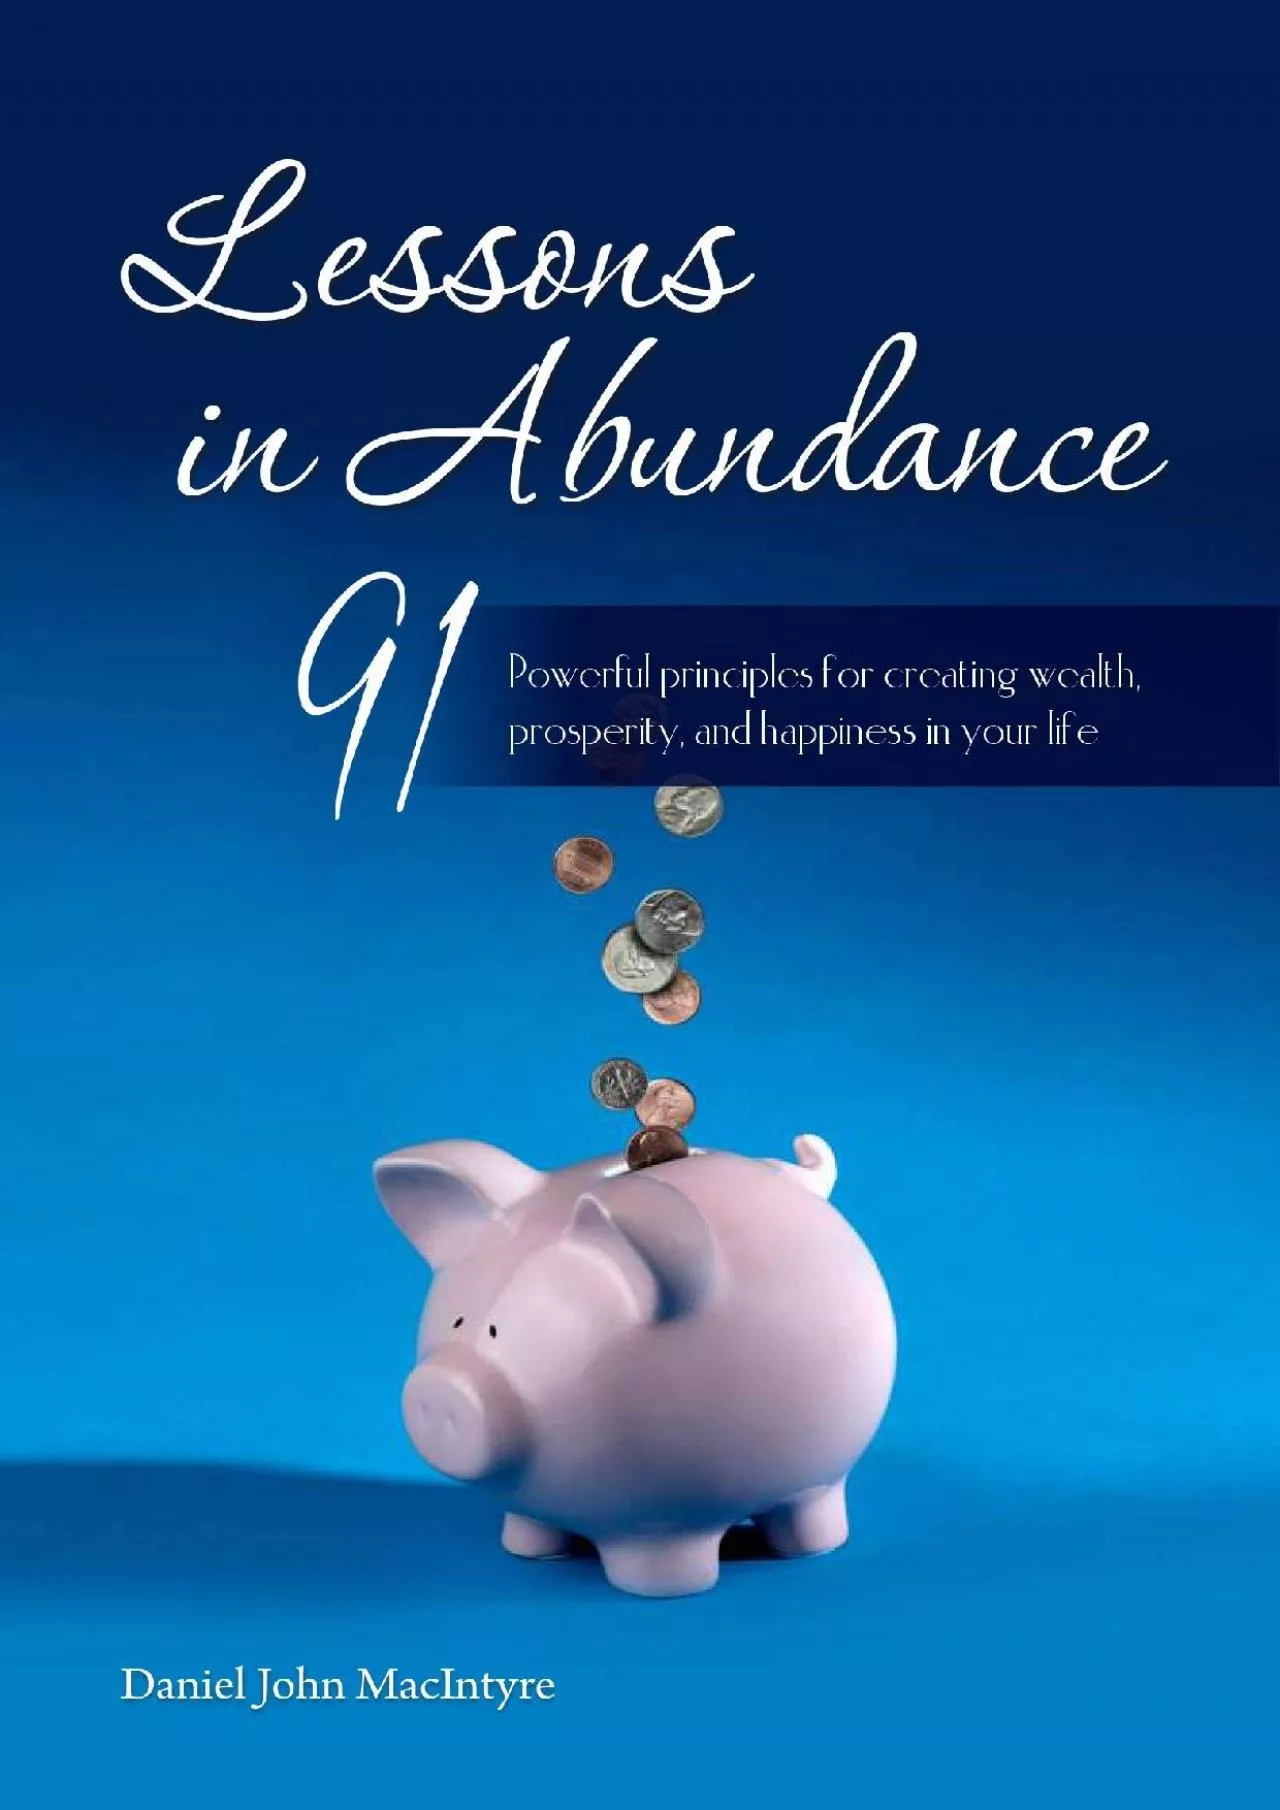 [EBOOK] Lessons in Abundance: 91 Powerful principles for creating wealth, prosperity,